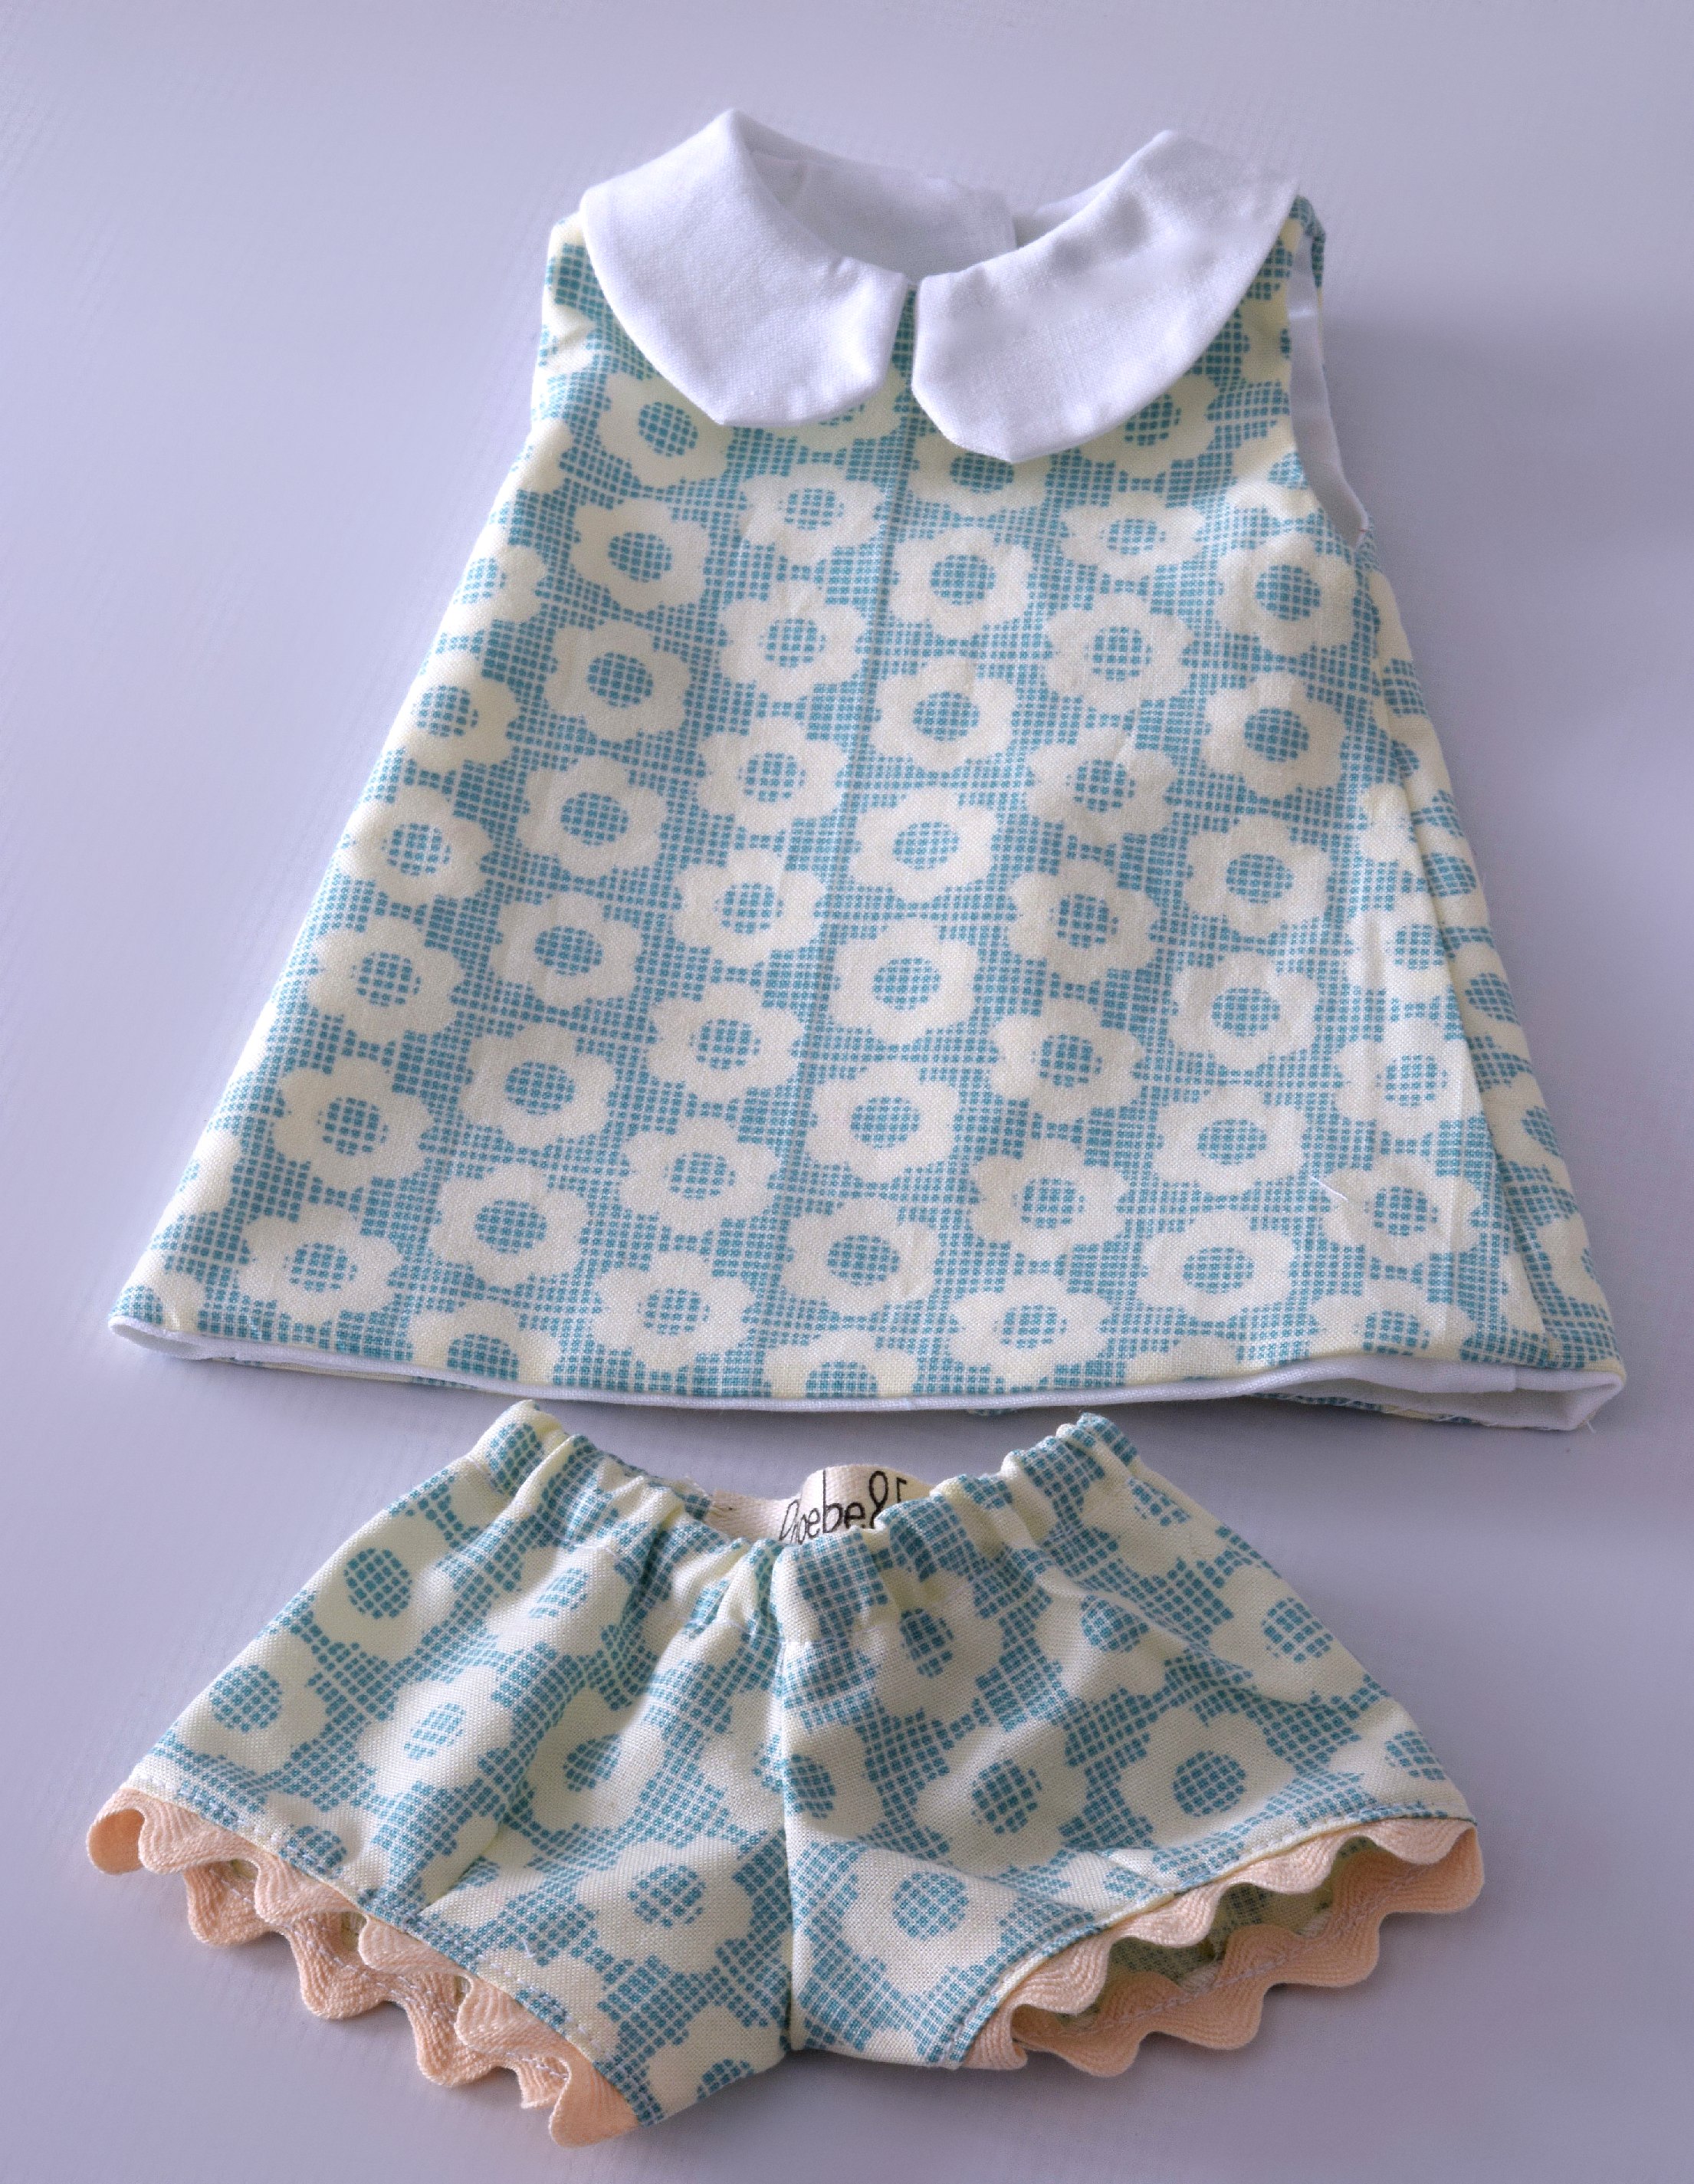 Doll Dressmaking Series: Making your own fabric trim — Phoebe&Egg